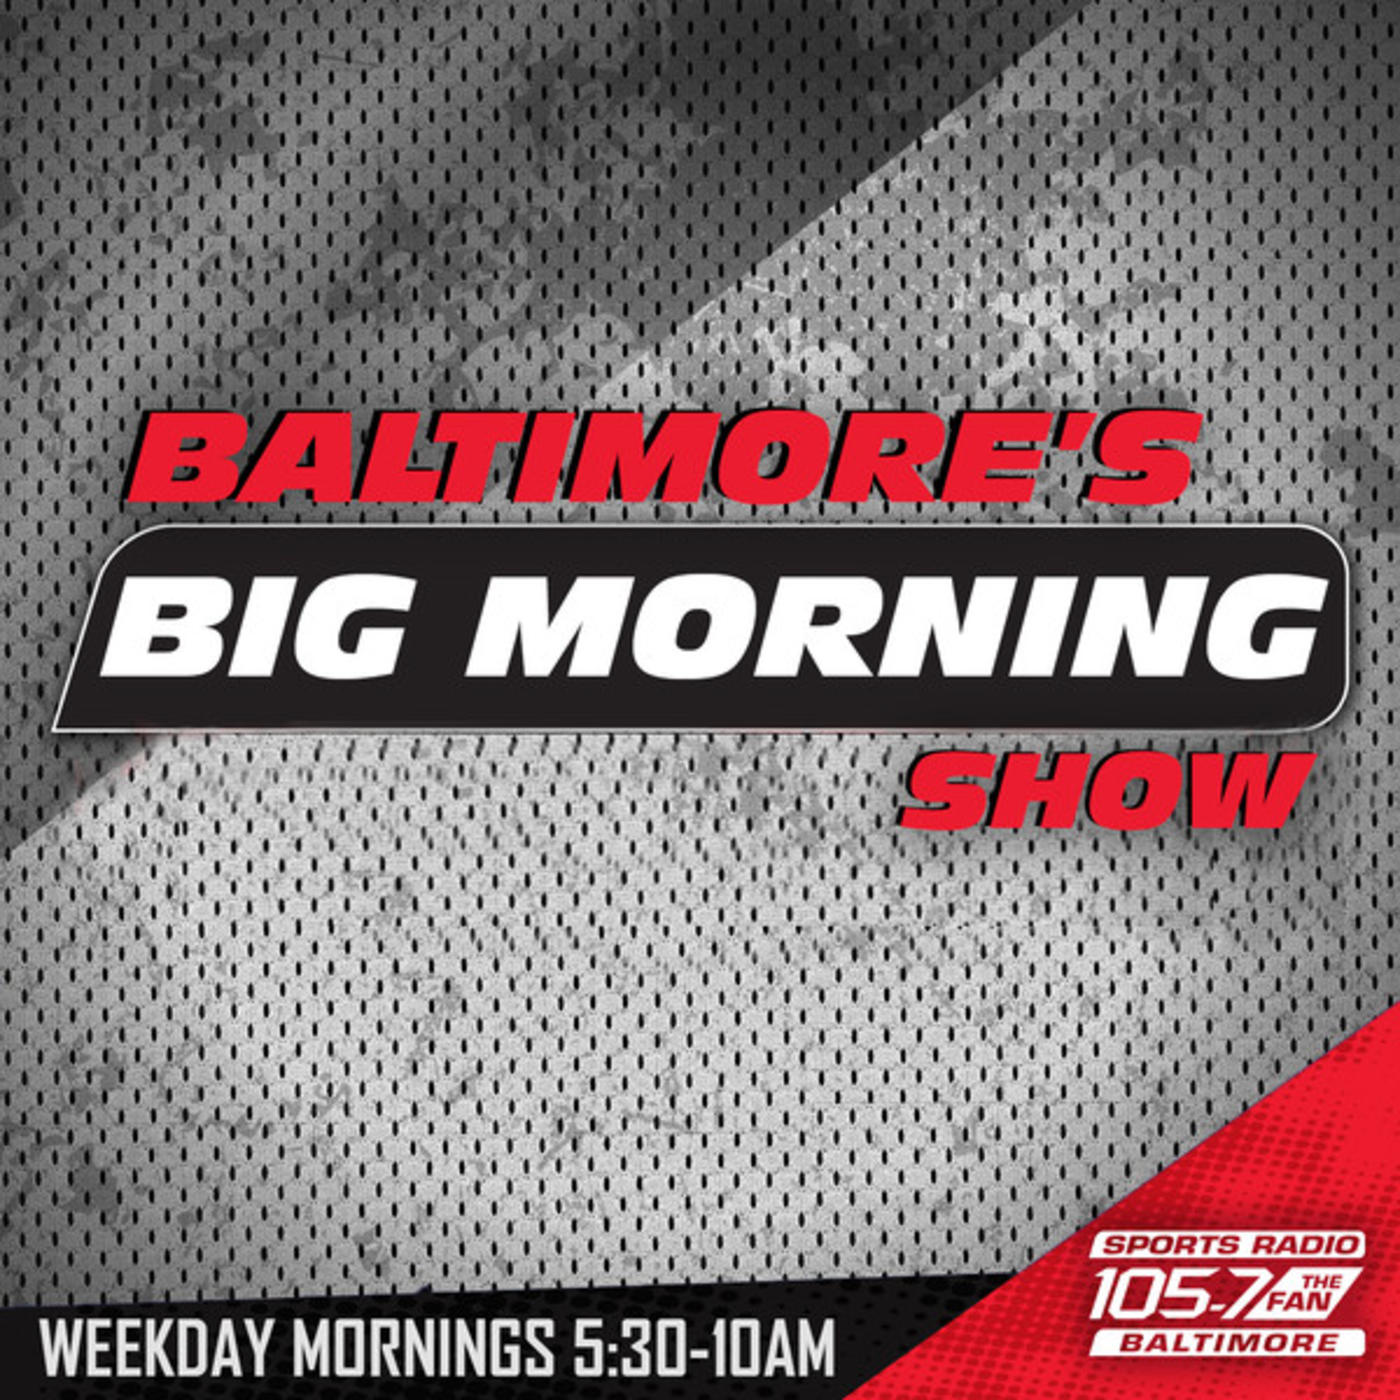 MD Head Football Coach Mike Locksley on the Big Bad Morning Show - 06-30-21